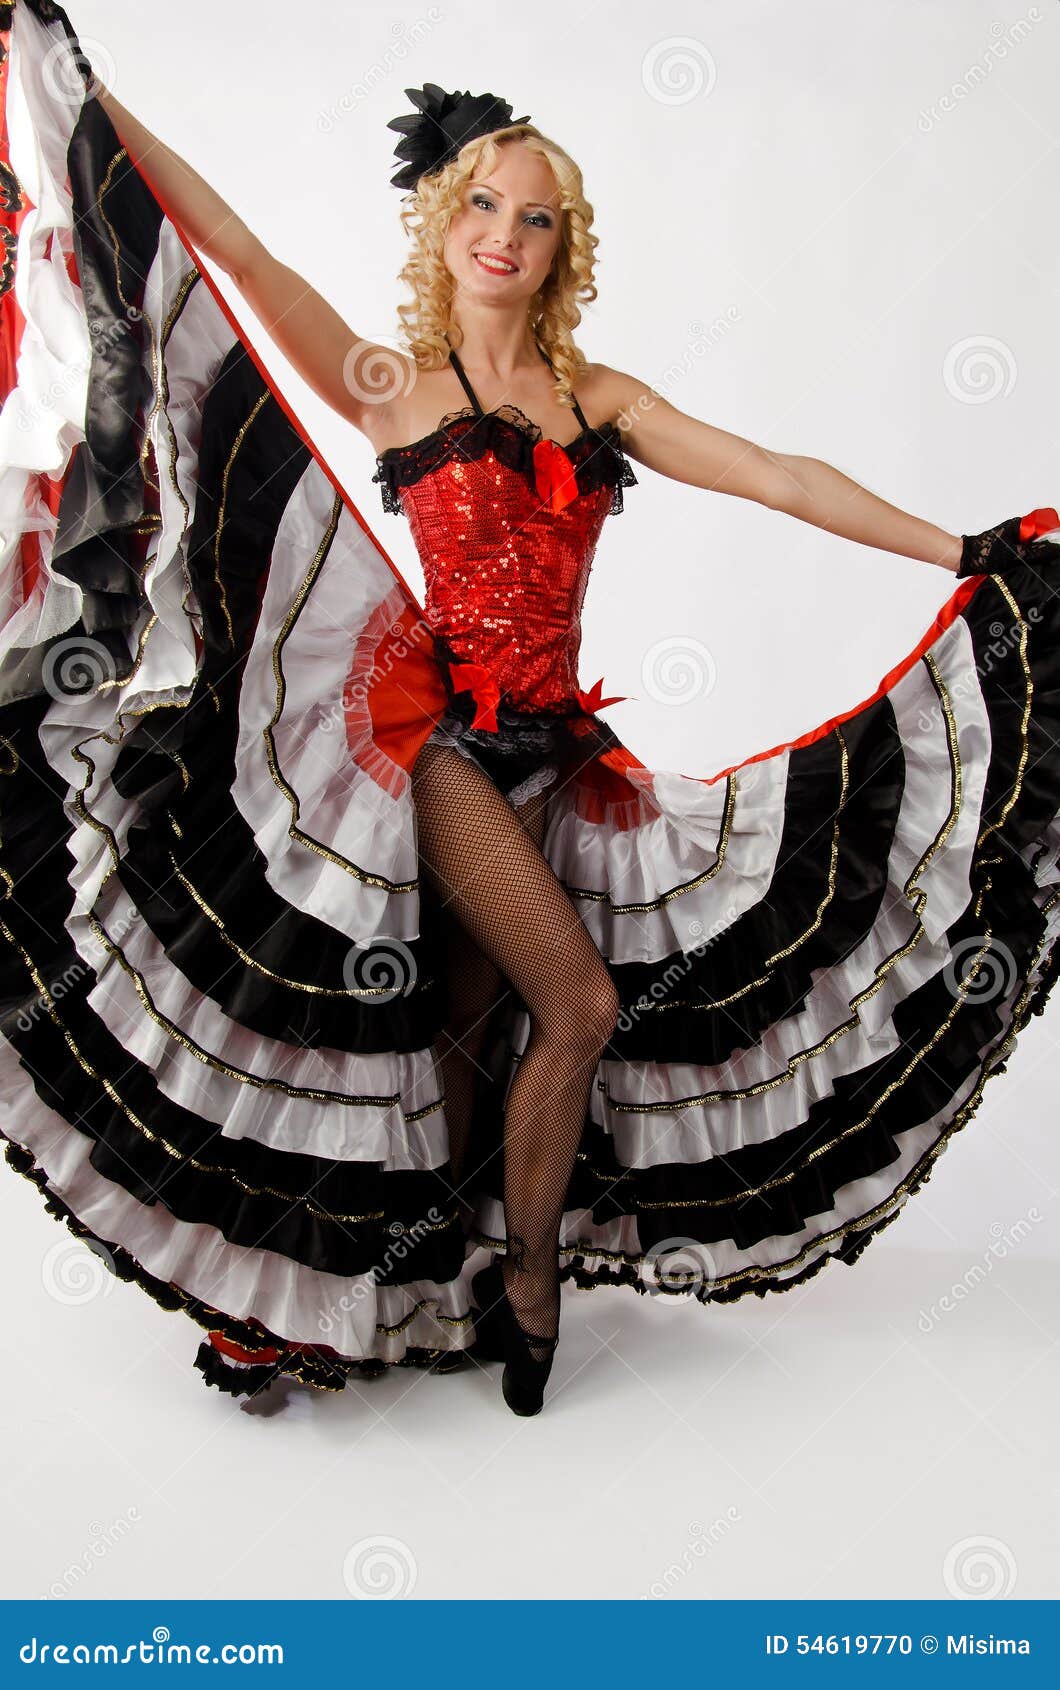 https://thumbs.dreamstime.com/z/cancan-dancer-young-sexy-blonde-dancing-studio-french-54619770.jpg